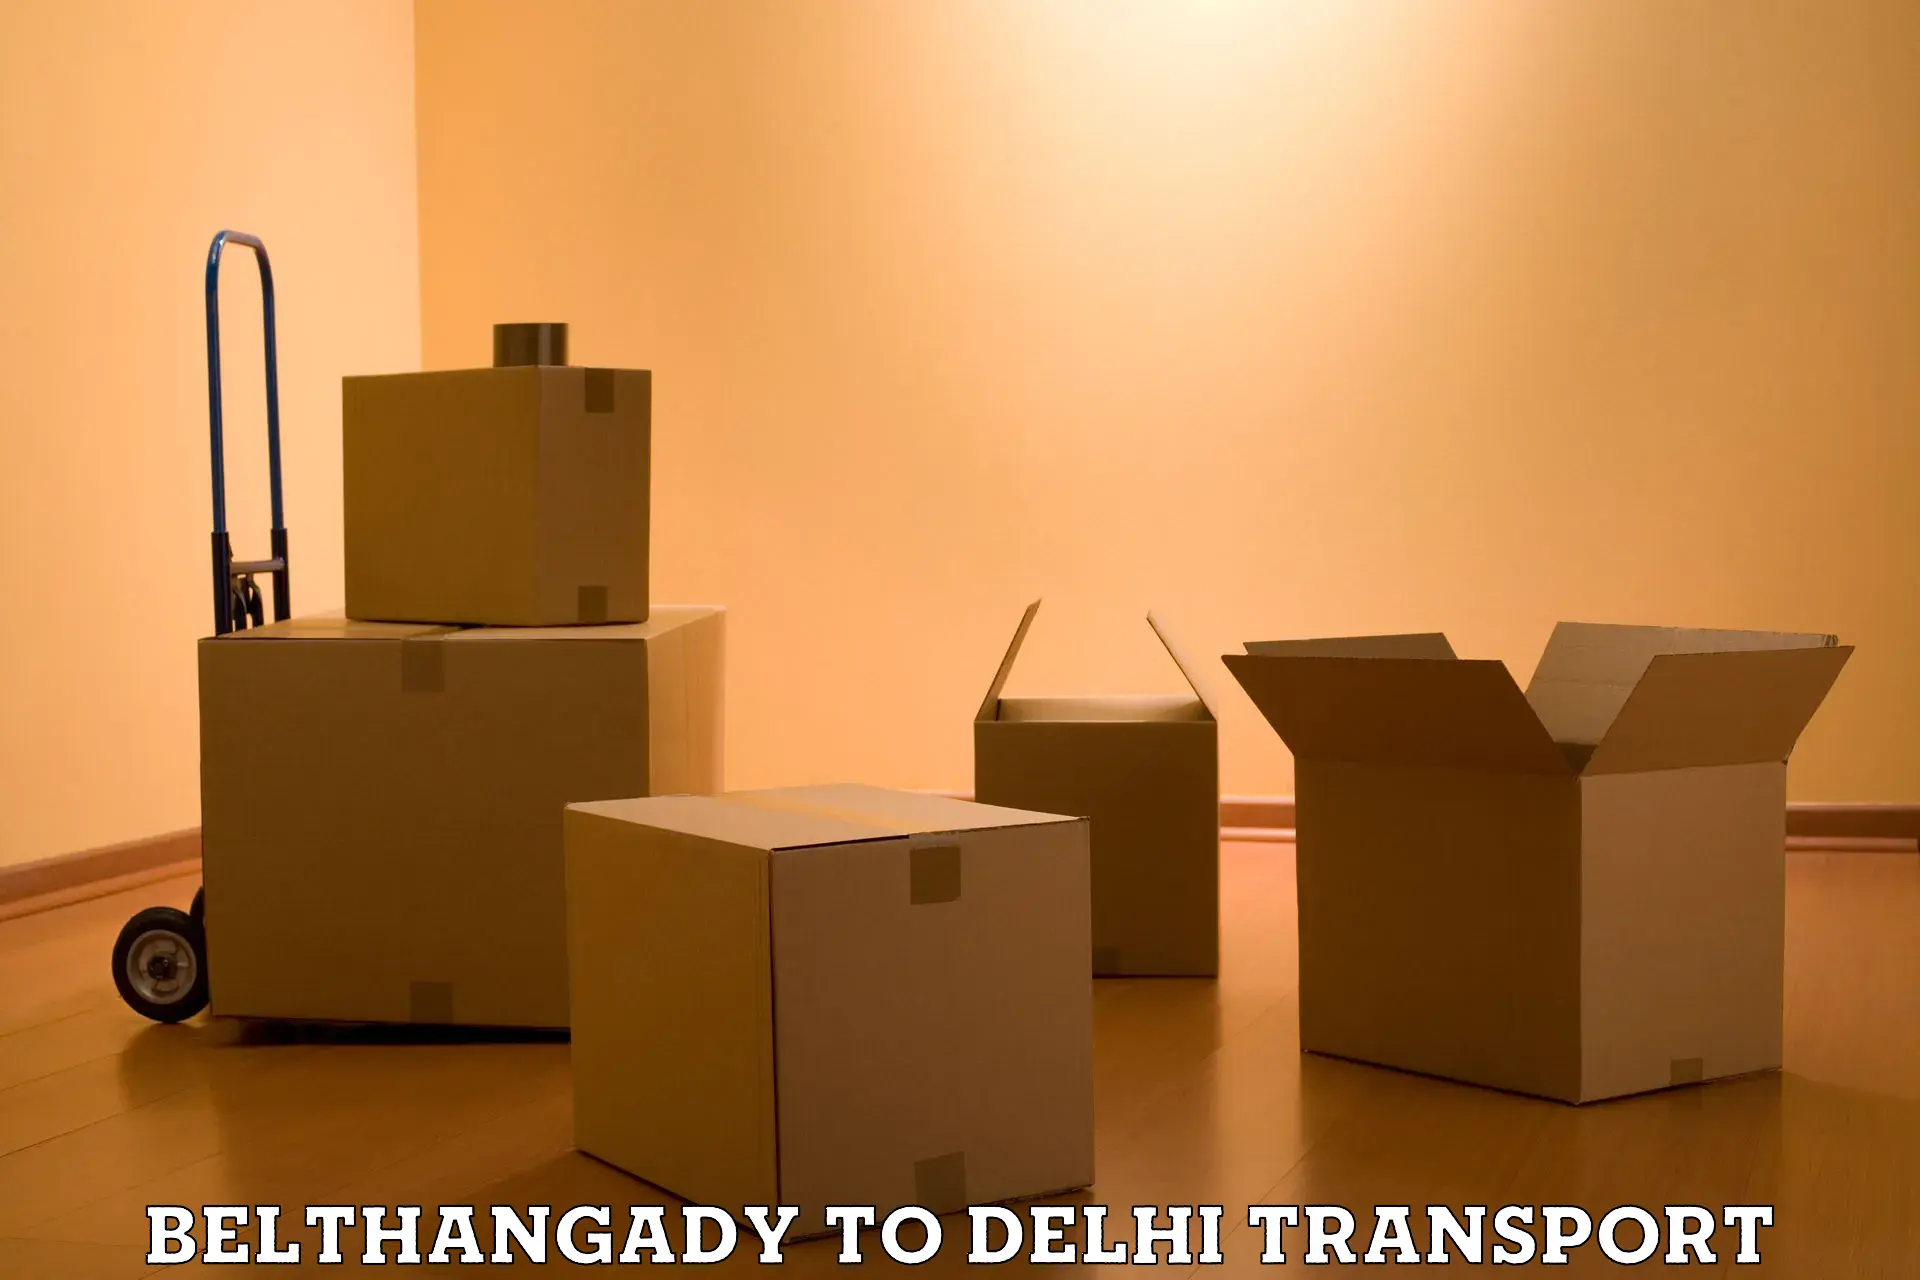 Road transport online services Belthangady to NCR